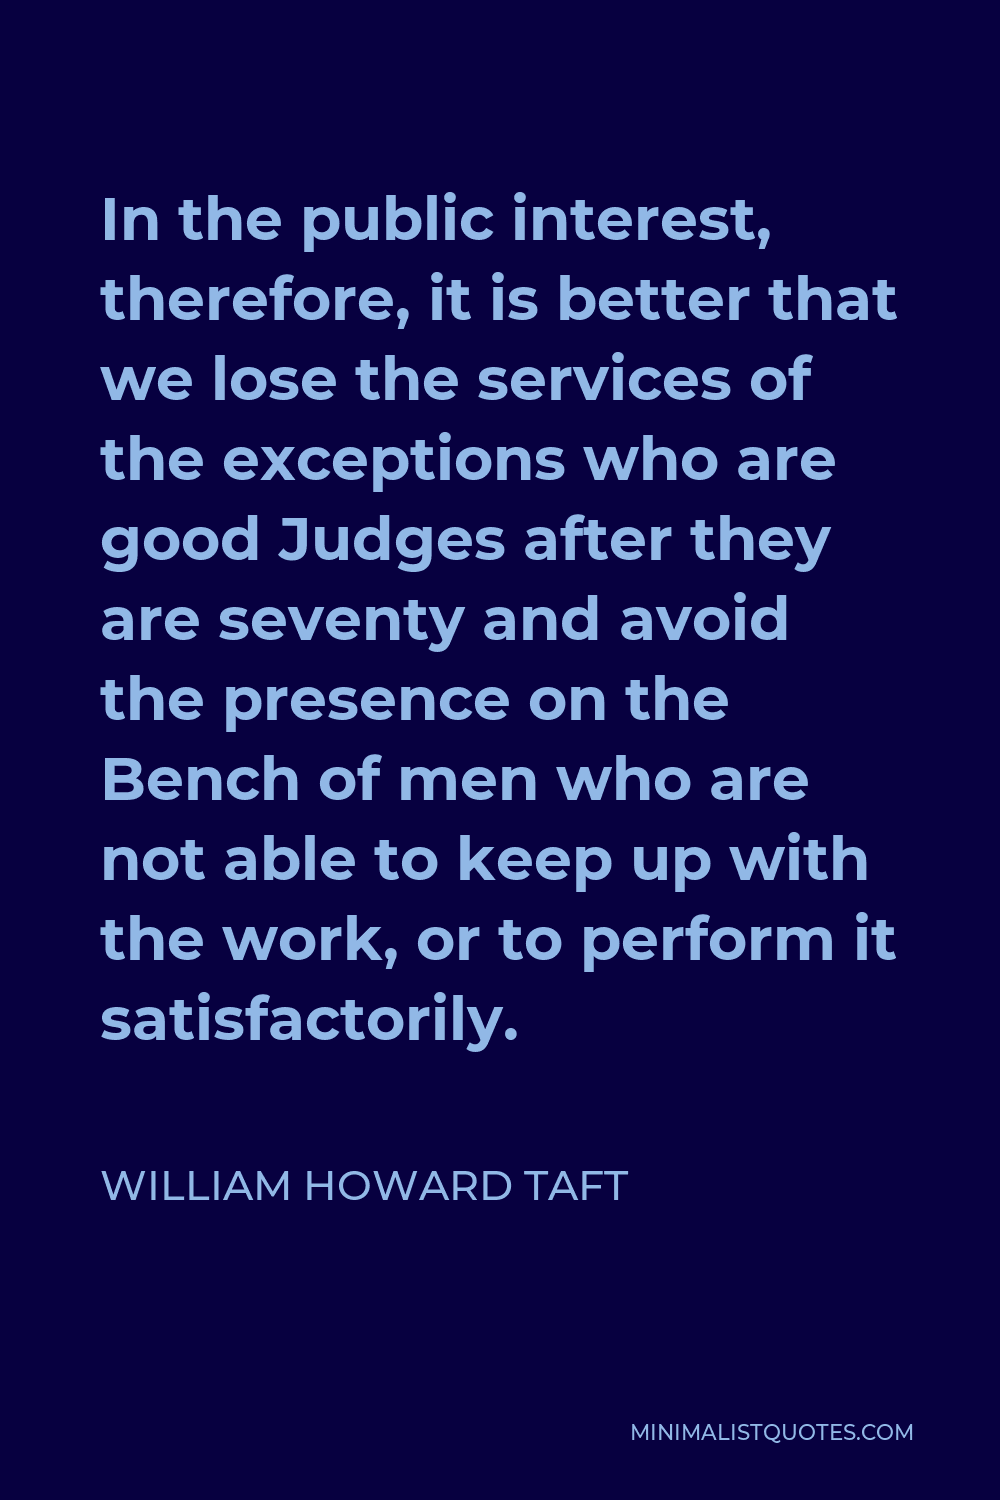 William Howard Taft Quote - In the public interest, therefore, it is better that we lose the services of the exceptions who are good Judges after they are seventy and avoid the presence on the Bench of men who are not able to keep up with the work, or to perform it satisfactorily.